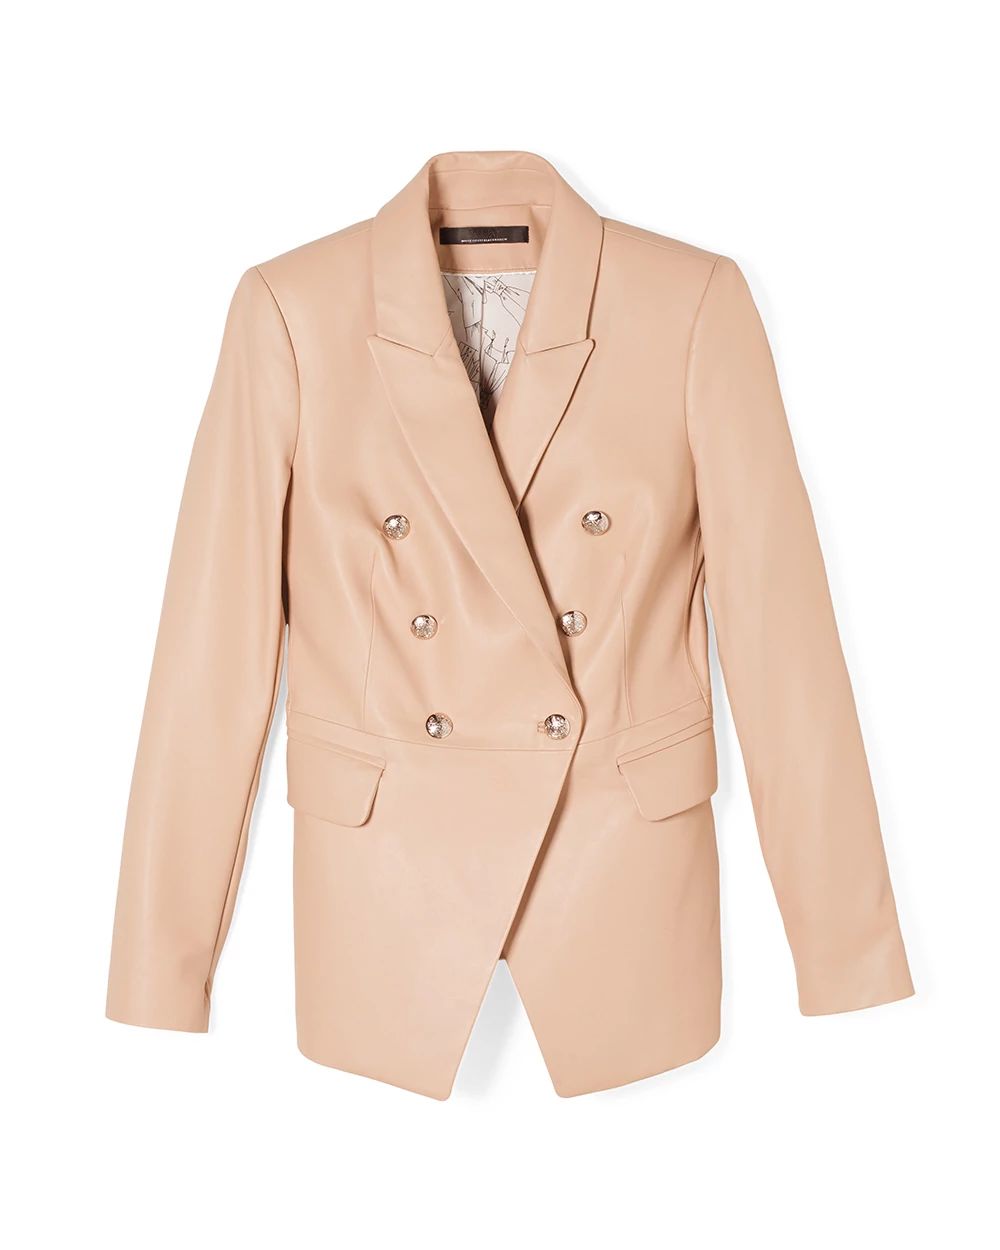 WHBM® Studio Leather Blazer click to view larger image.